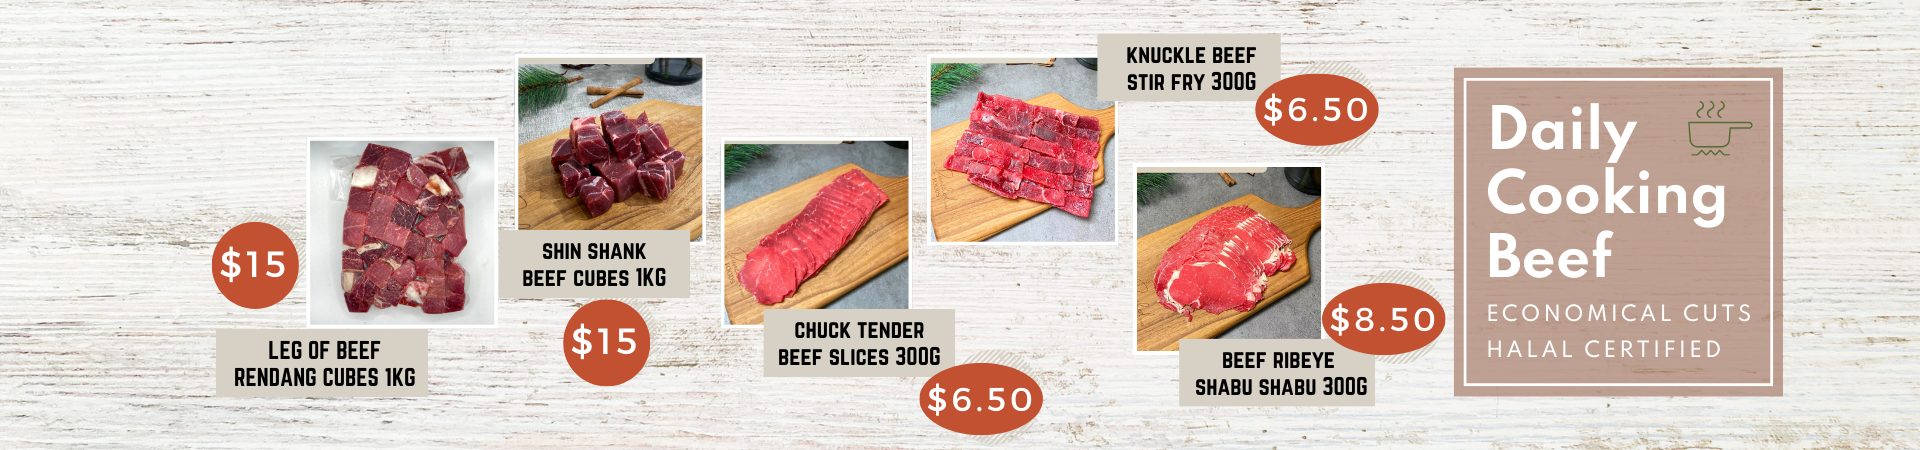 Halal Daily Cooking Beef - Economical Beef Cuts